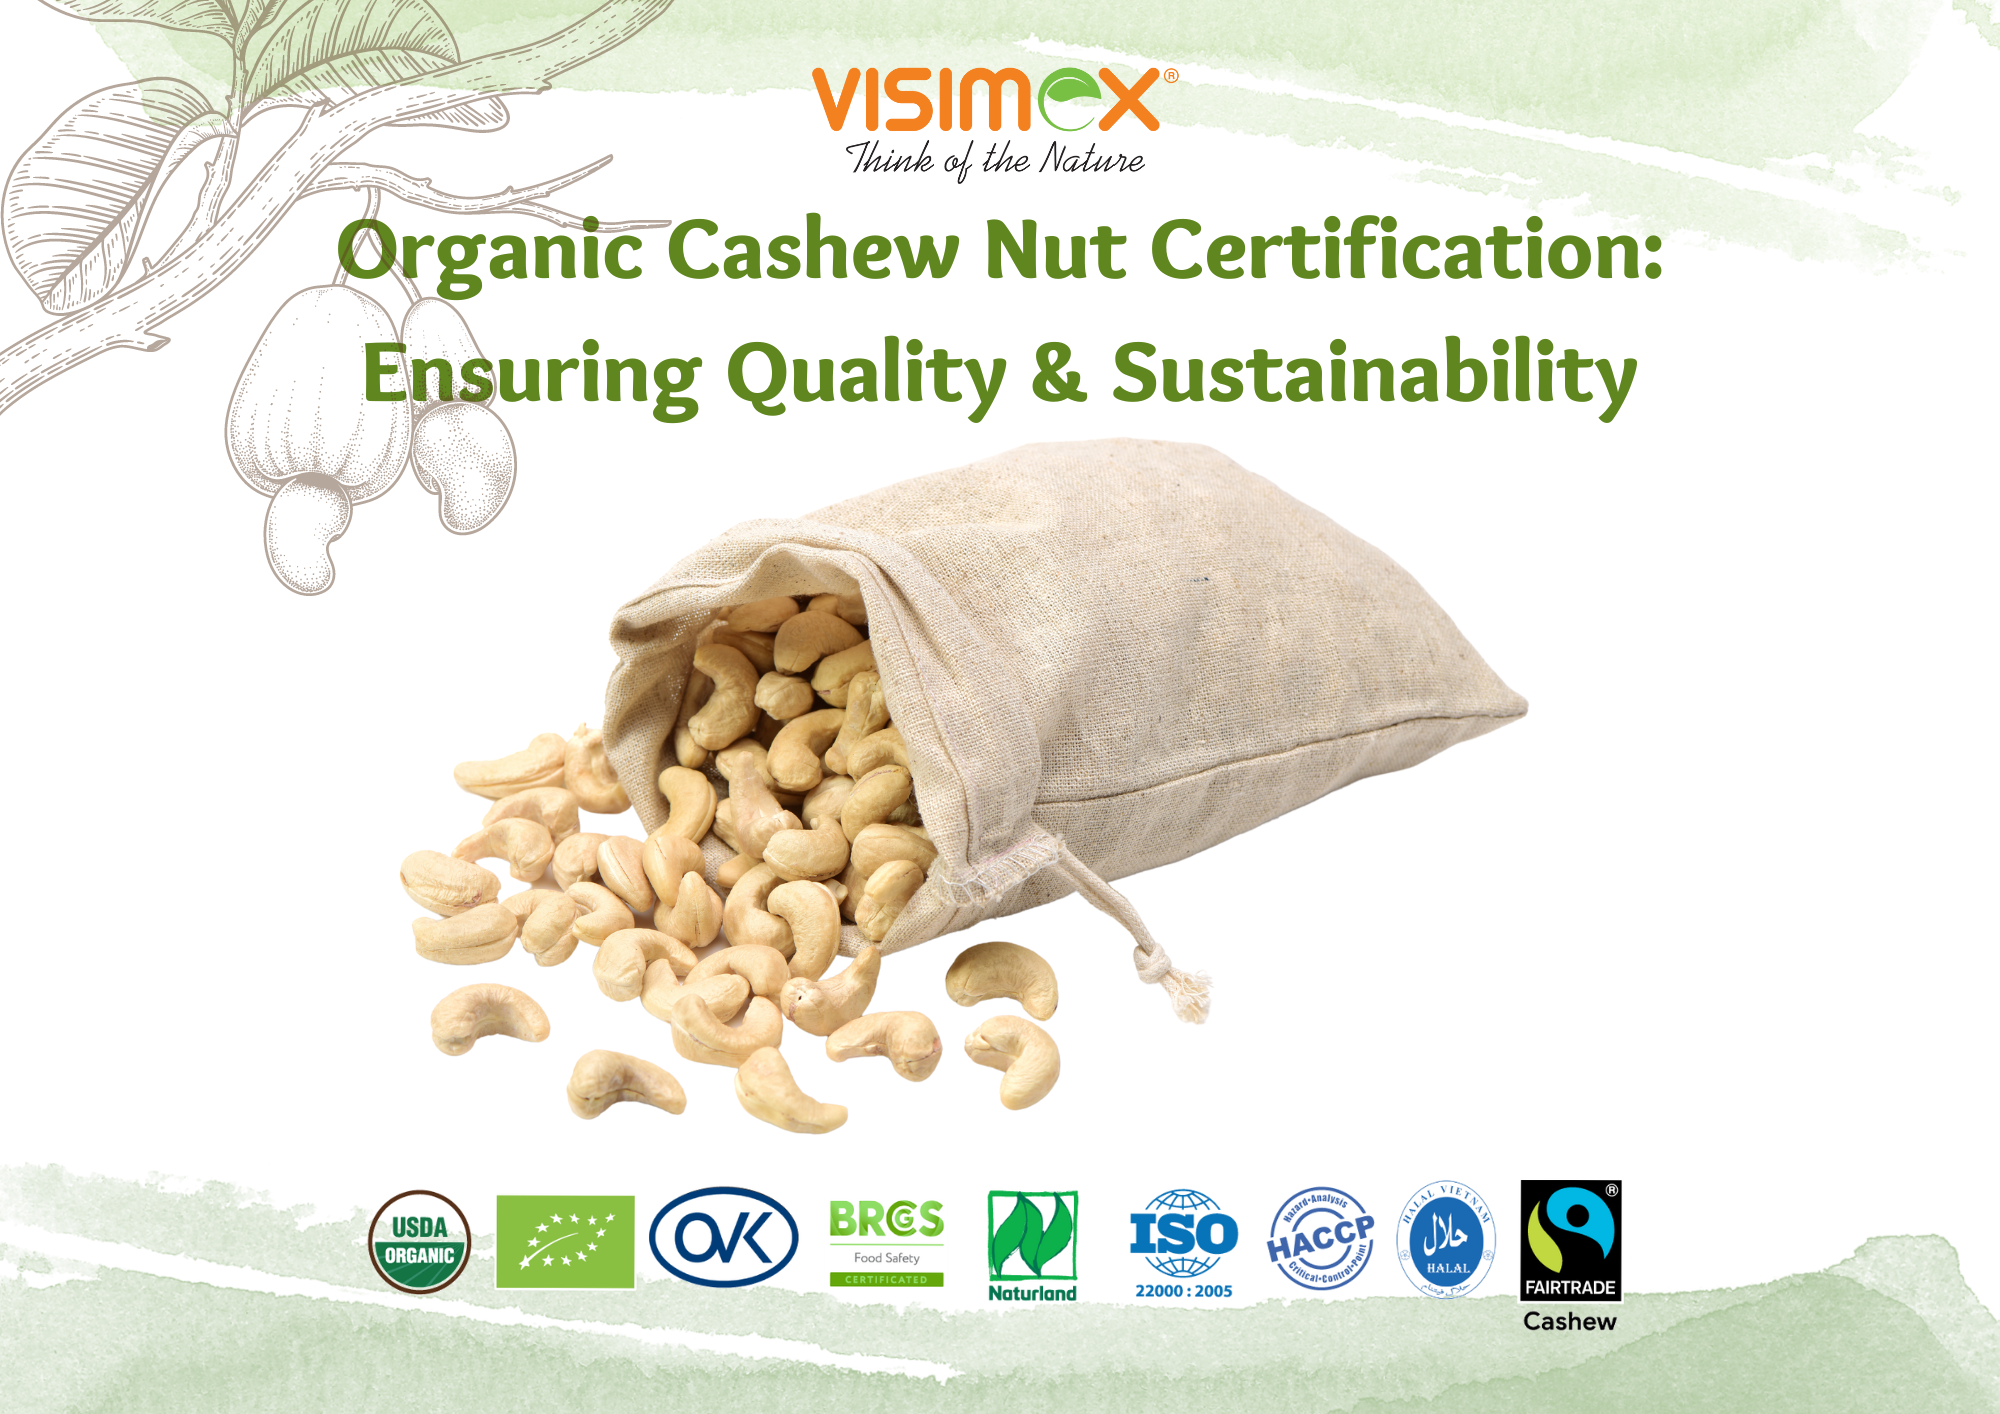 Organic Cashew Nut Certification: Ensuring Quality and Sustainability